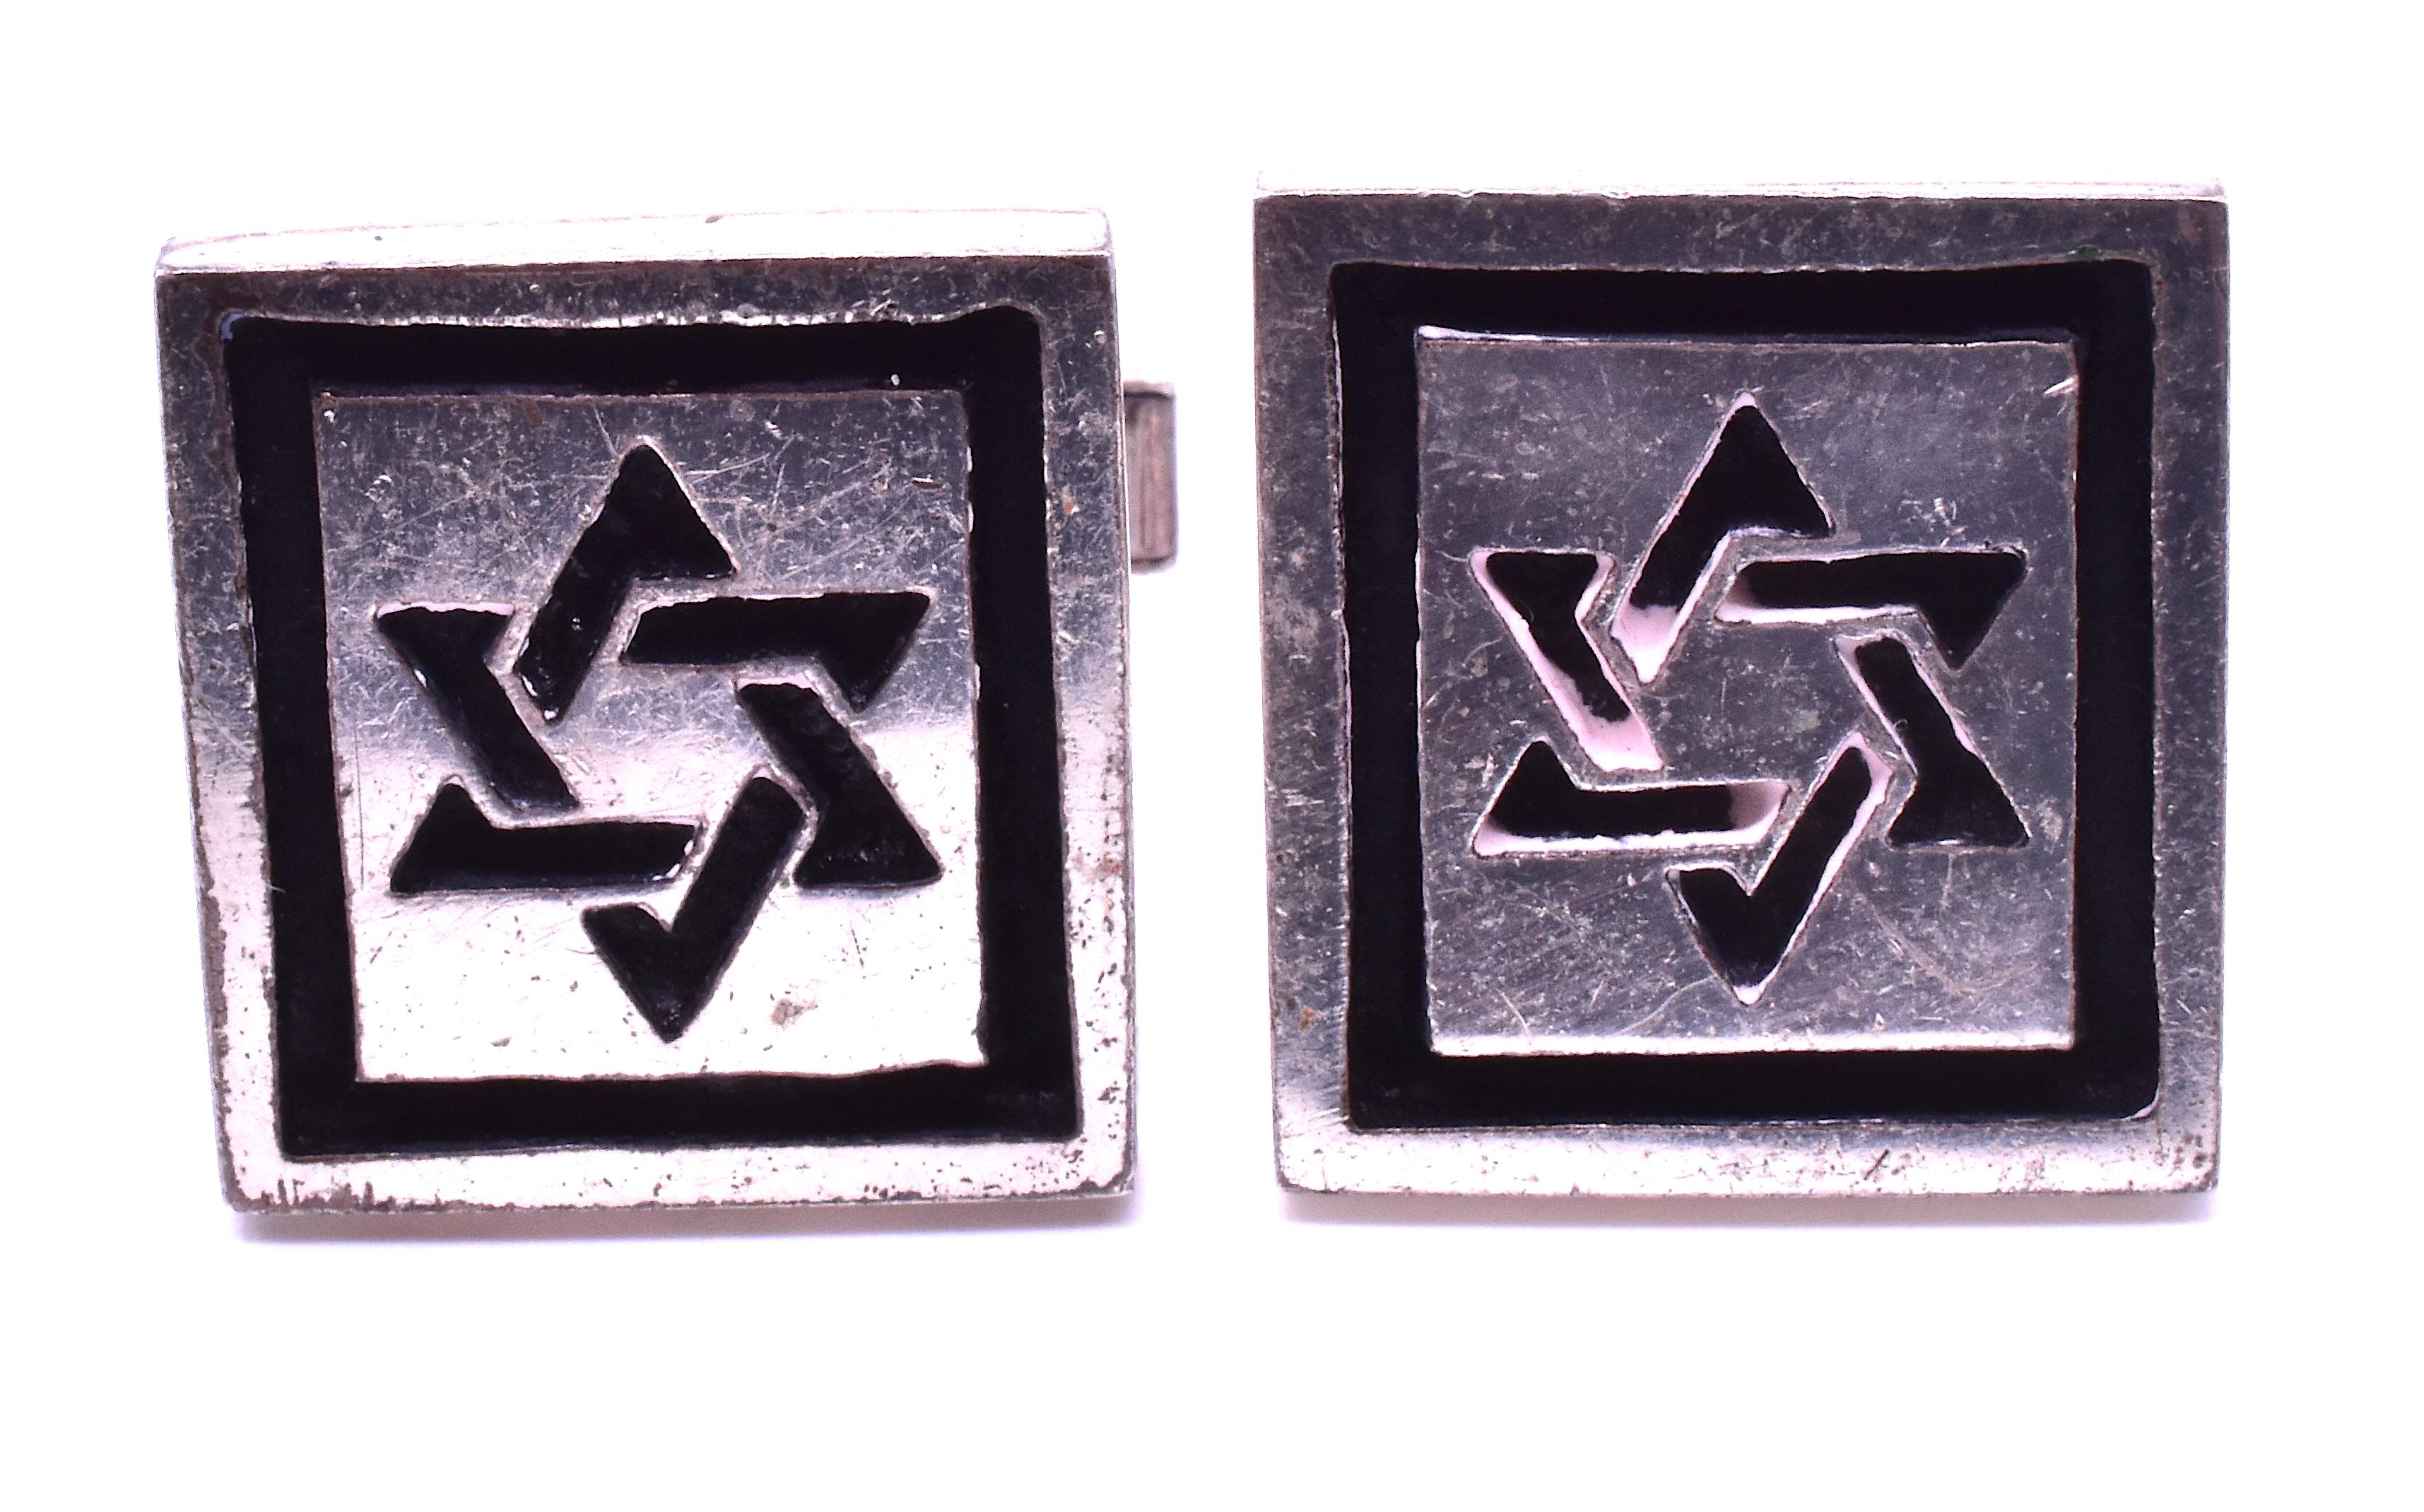 Fenwick & Sailors was a company based in Hollywood known for novelty cufflinks during the middle of the twentieth century.. We love these Silver Star of David cufflinks - perfect to wear on a special occasion like a B'nai Mitzvah or a wedding. Makes